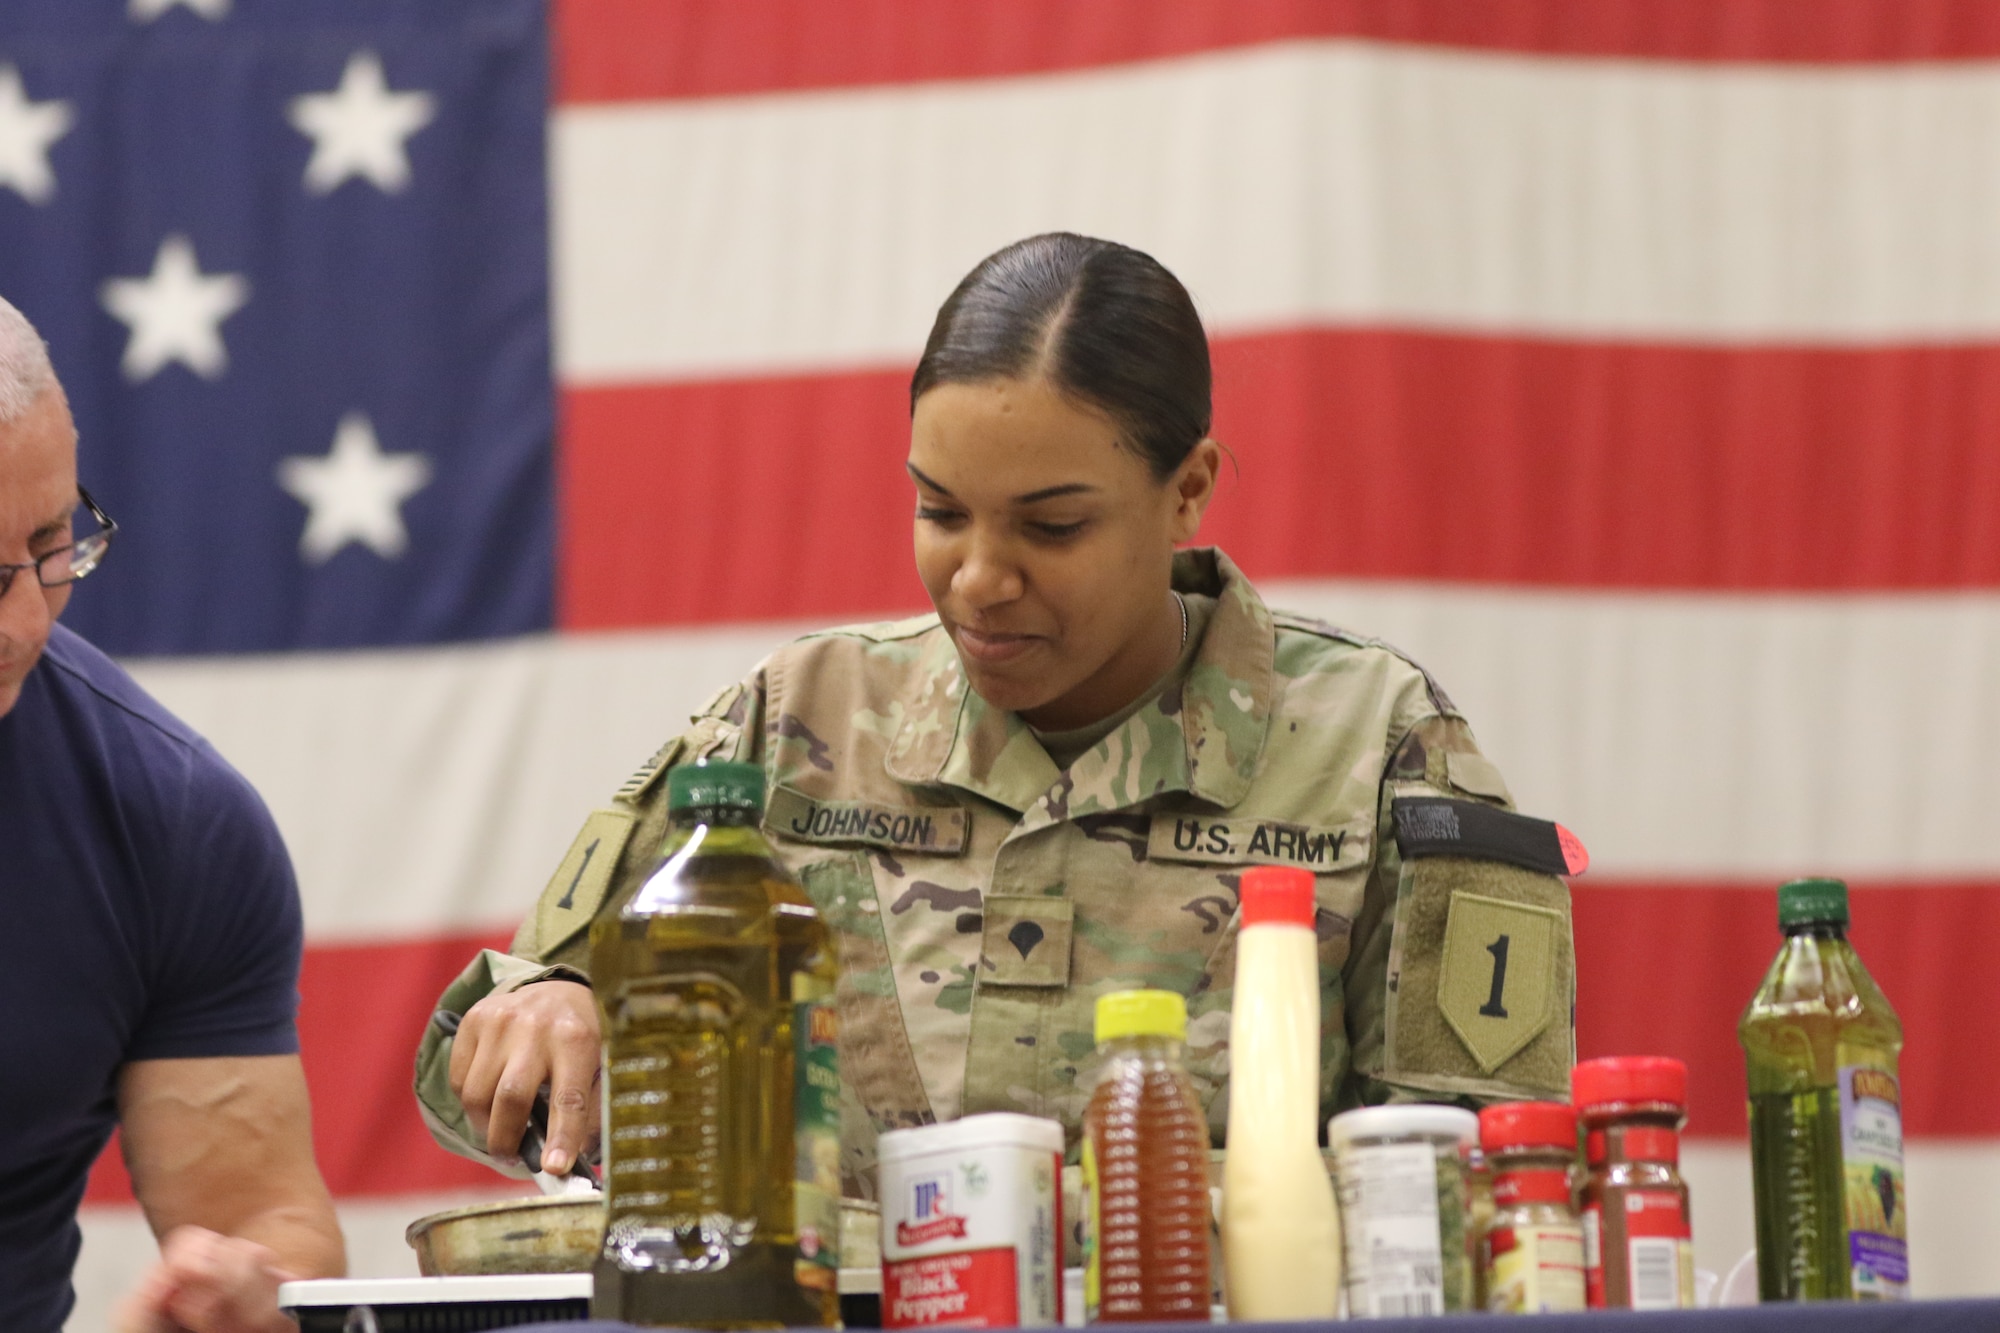 USO Spring Tour 2019 in Afghanistan